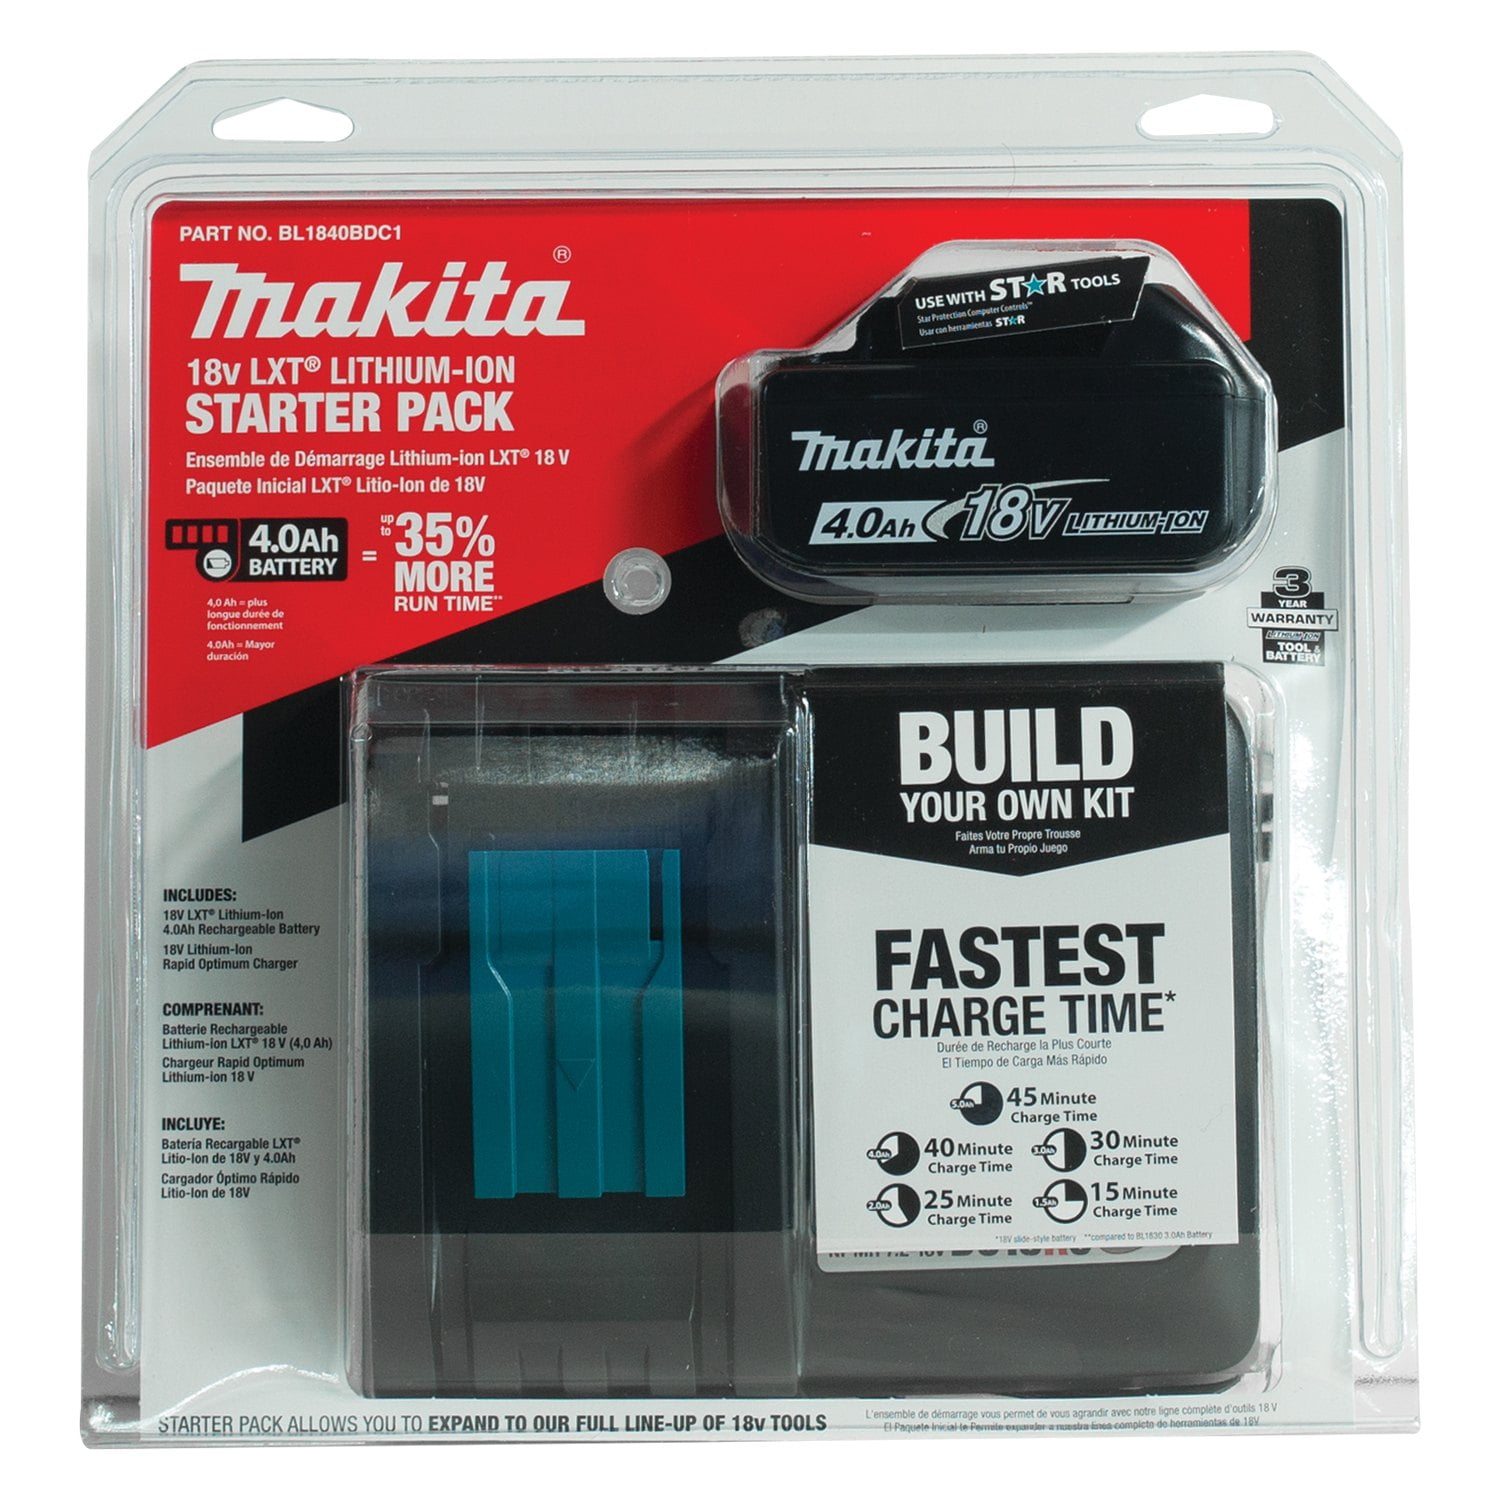 Makita 18V LXT 4.0Ah Lithium-Ion Battery and Rapid Optimum Charger Starter  Pack BL1840BDC2